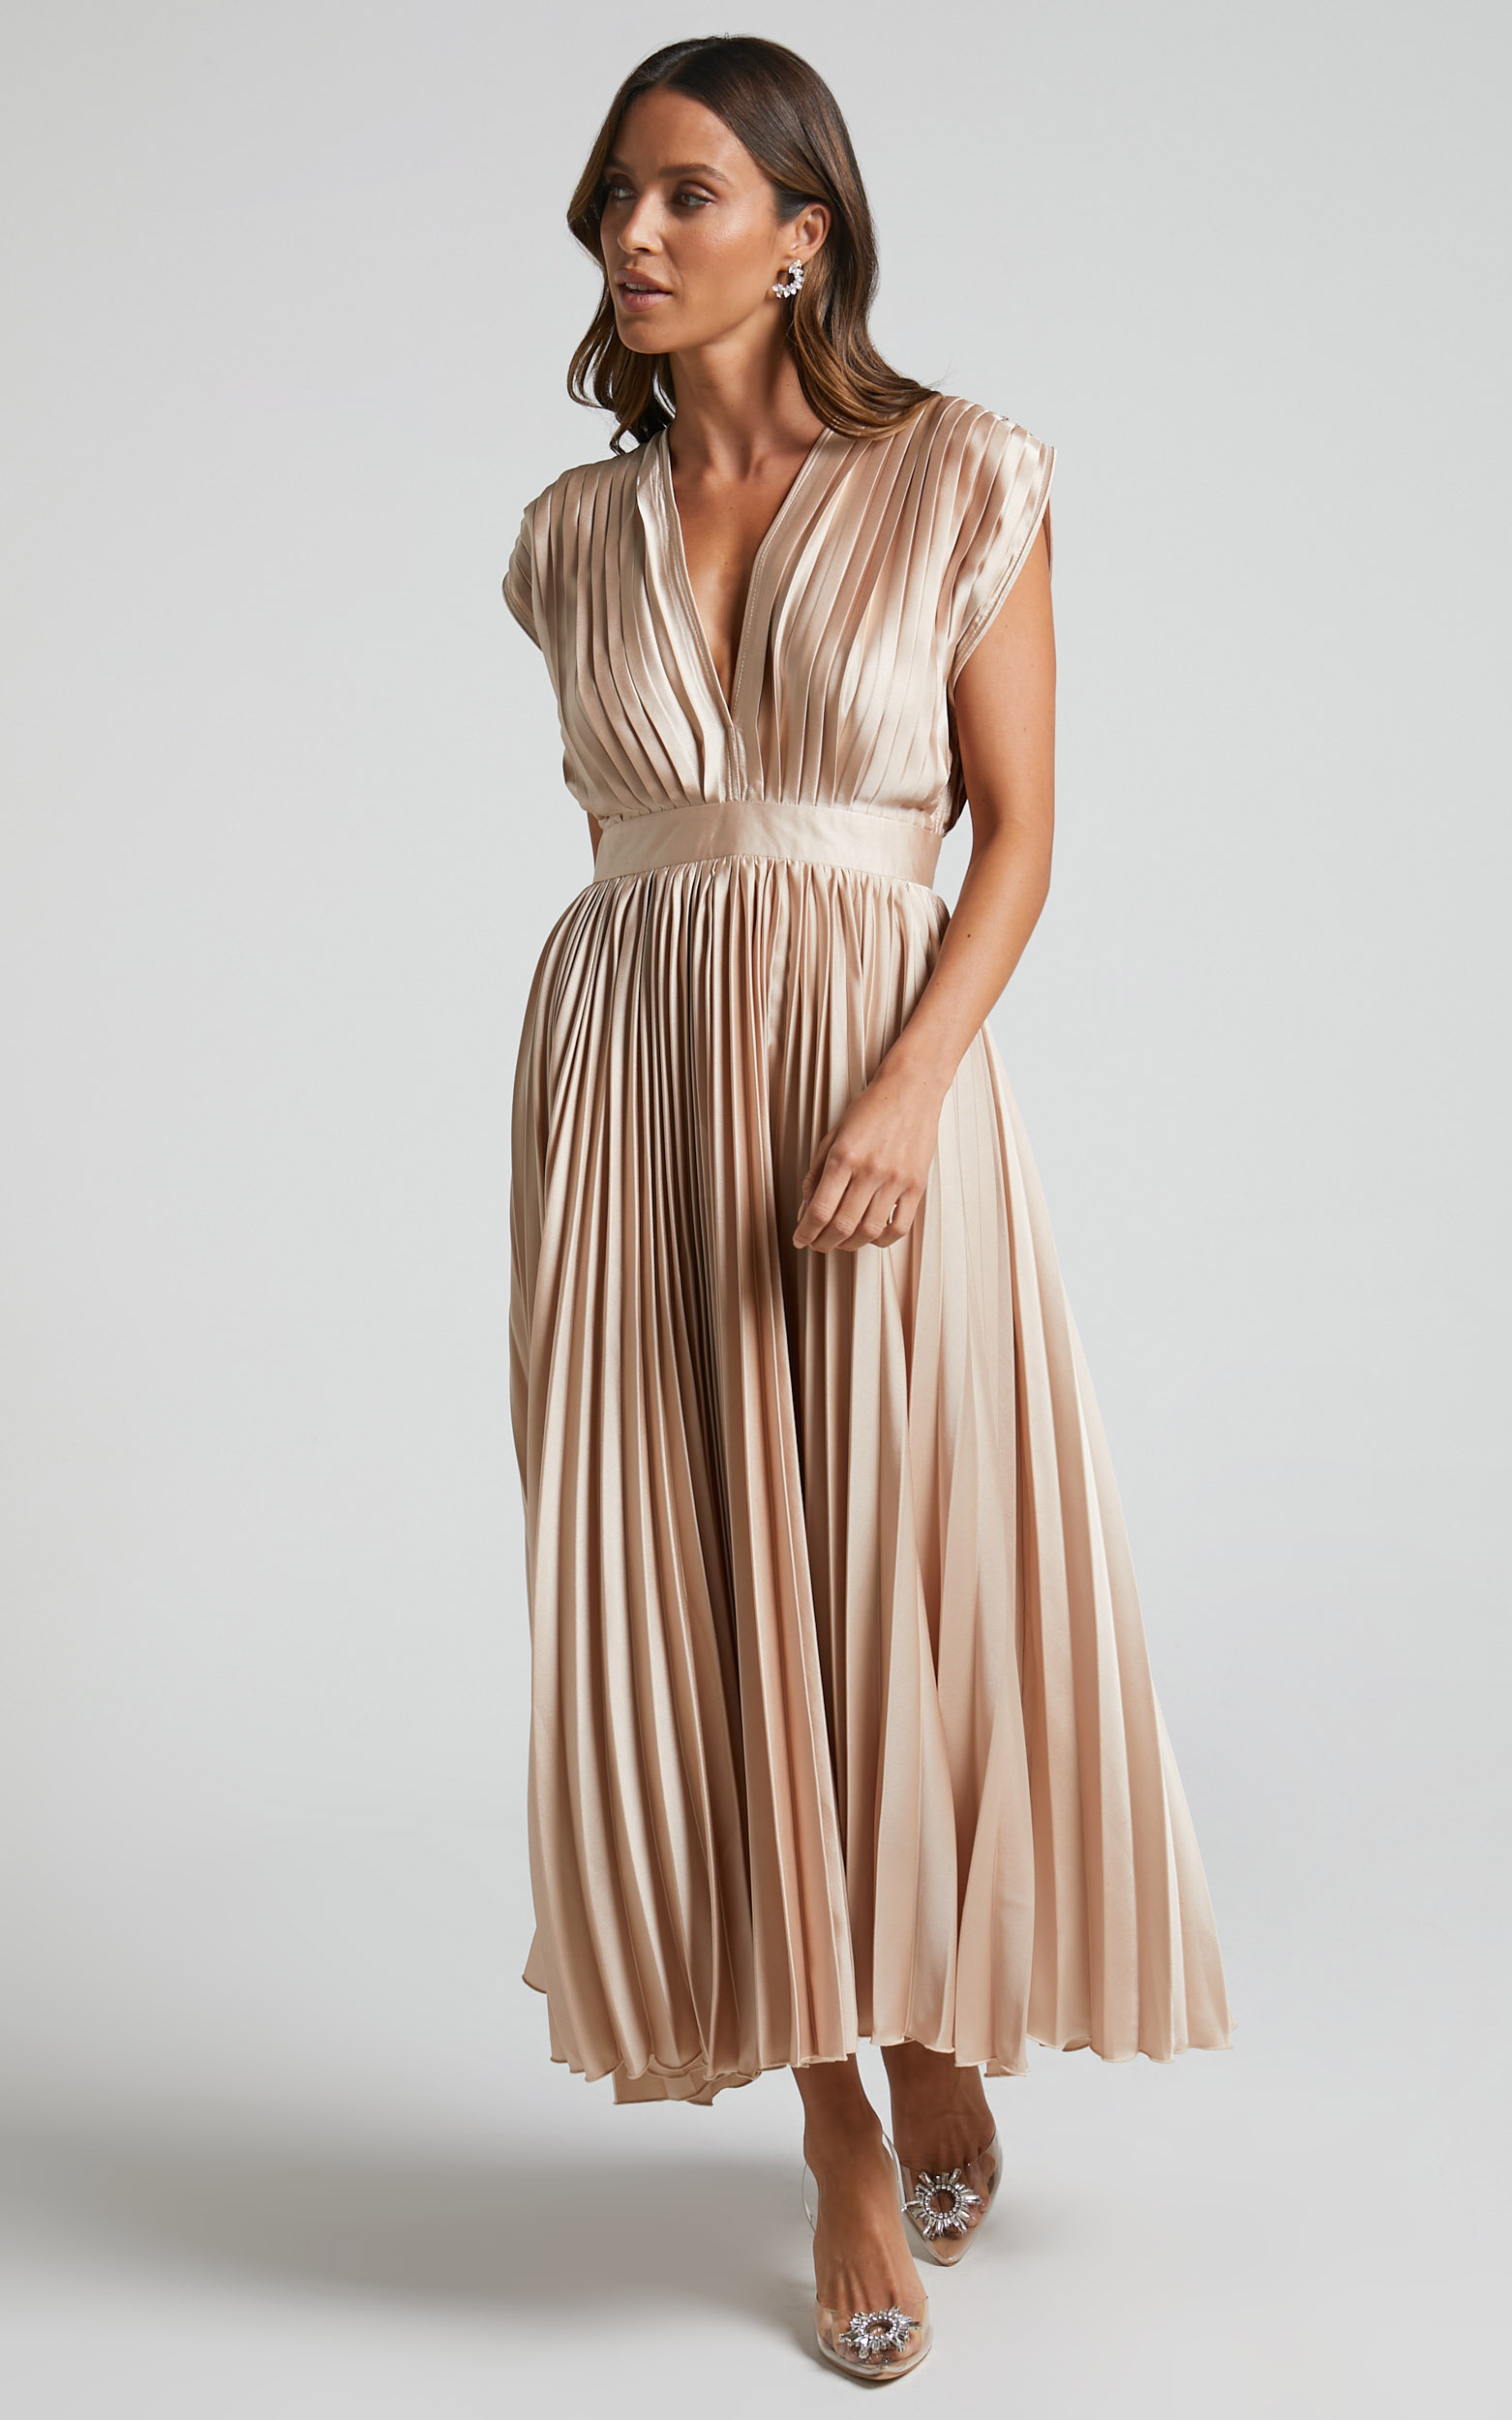 Della Maxi Dress - Plunge Neck Short Sleeve Pleated Dress in Champagne - 06, NEU2, hi-res image number null